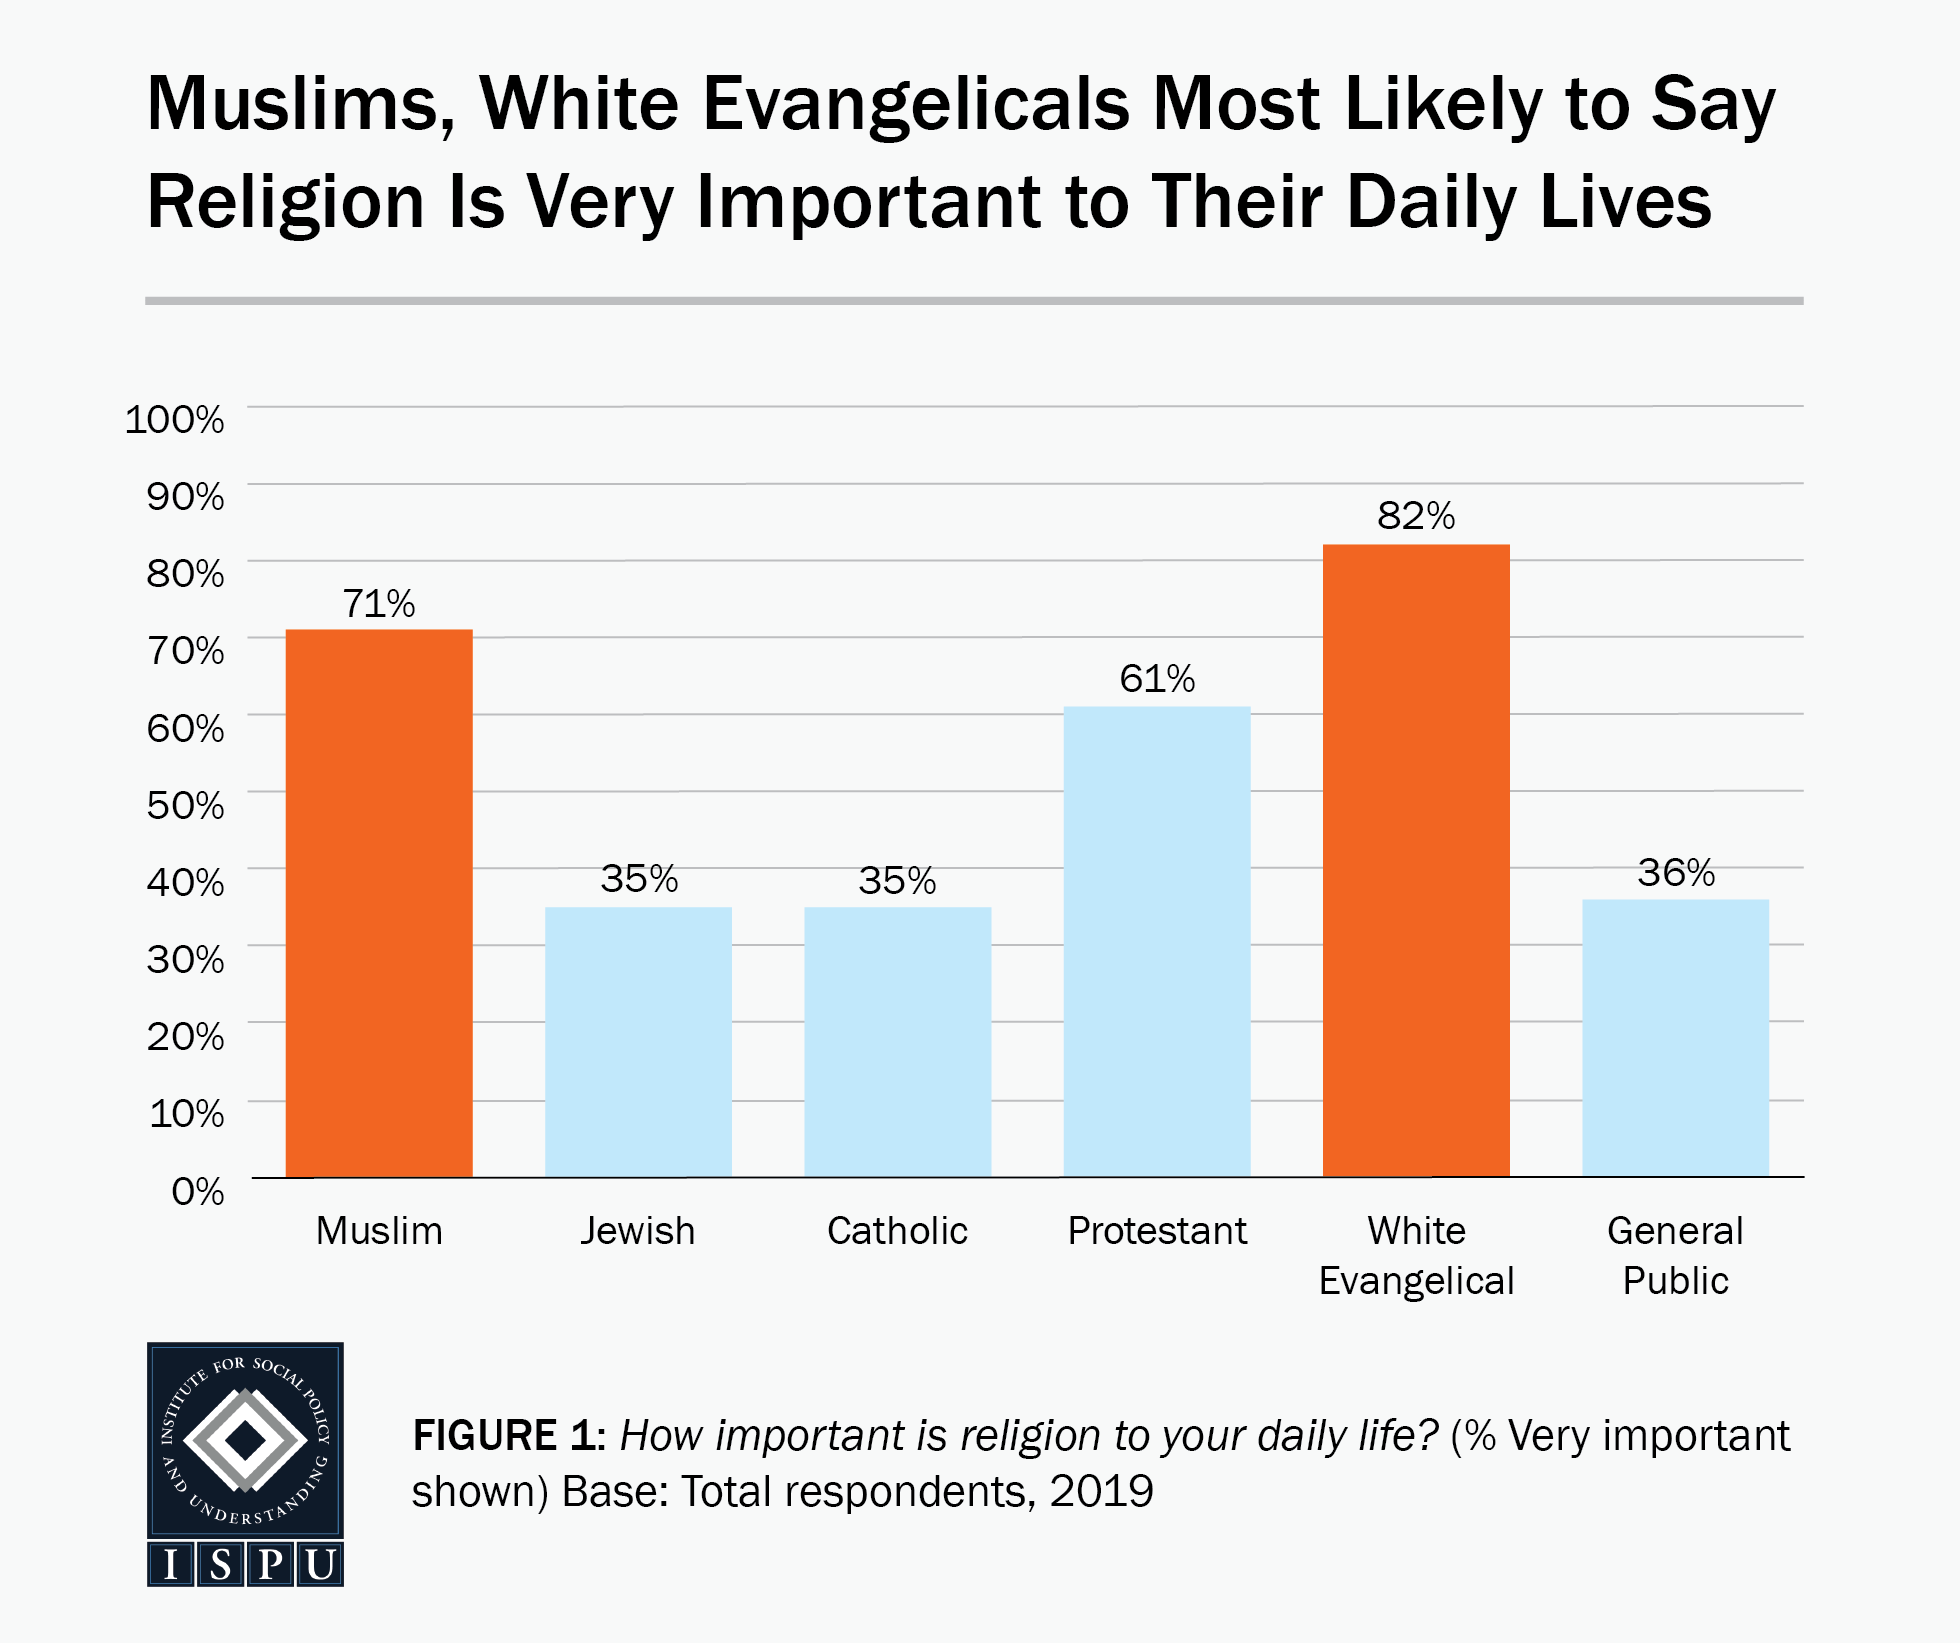 Figure 1: A bar graph showing that Muslims (71%) and white Evangelicals (82%) are the most likely faith groups to say religion is very important to their daily lives